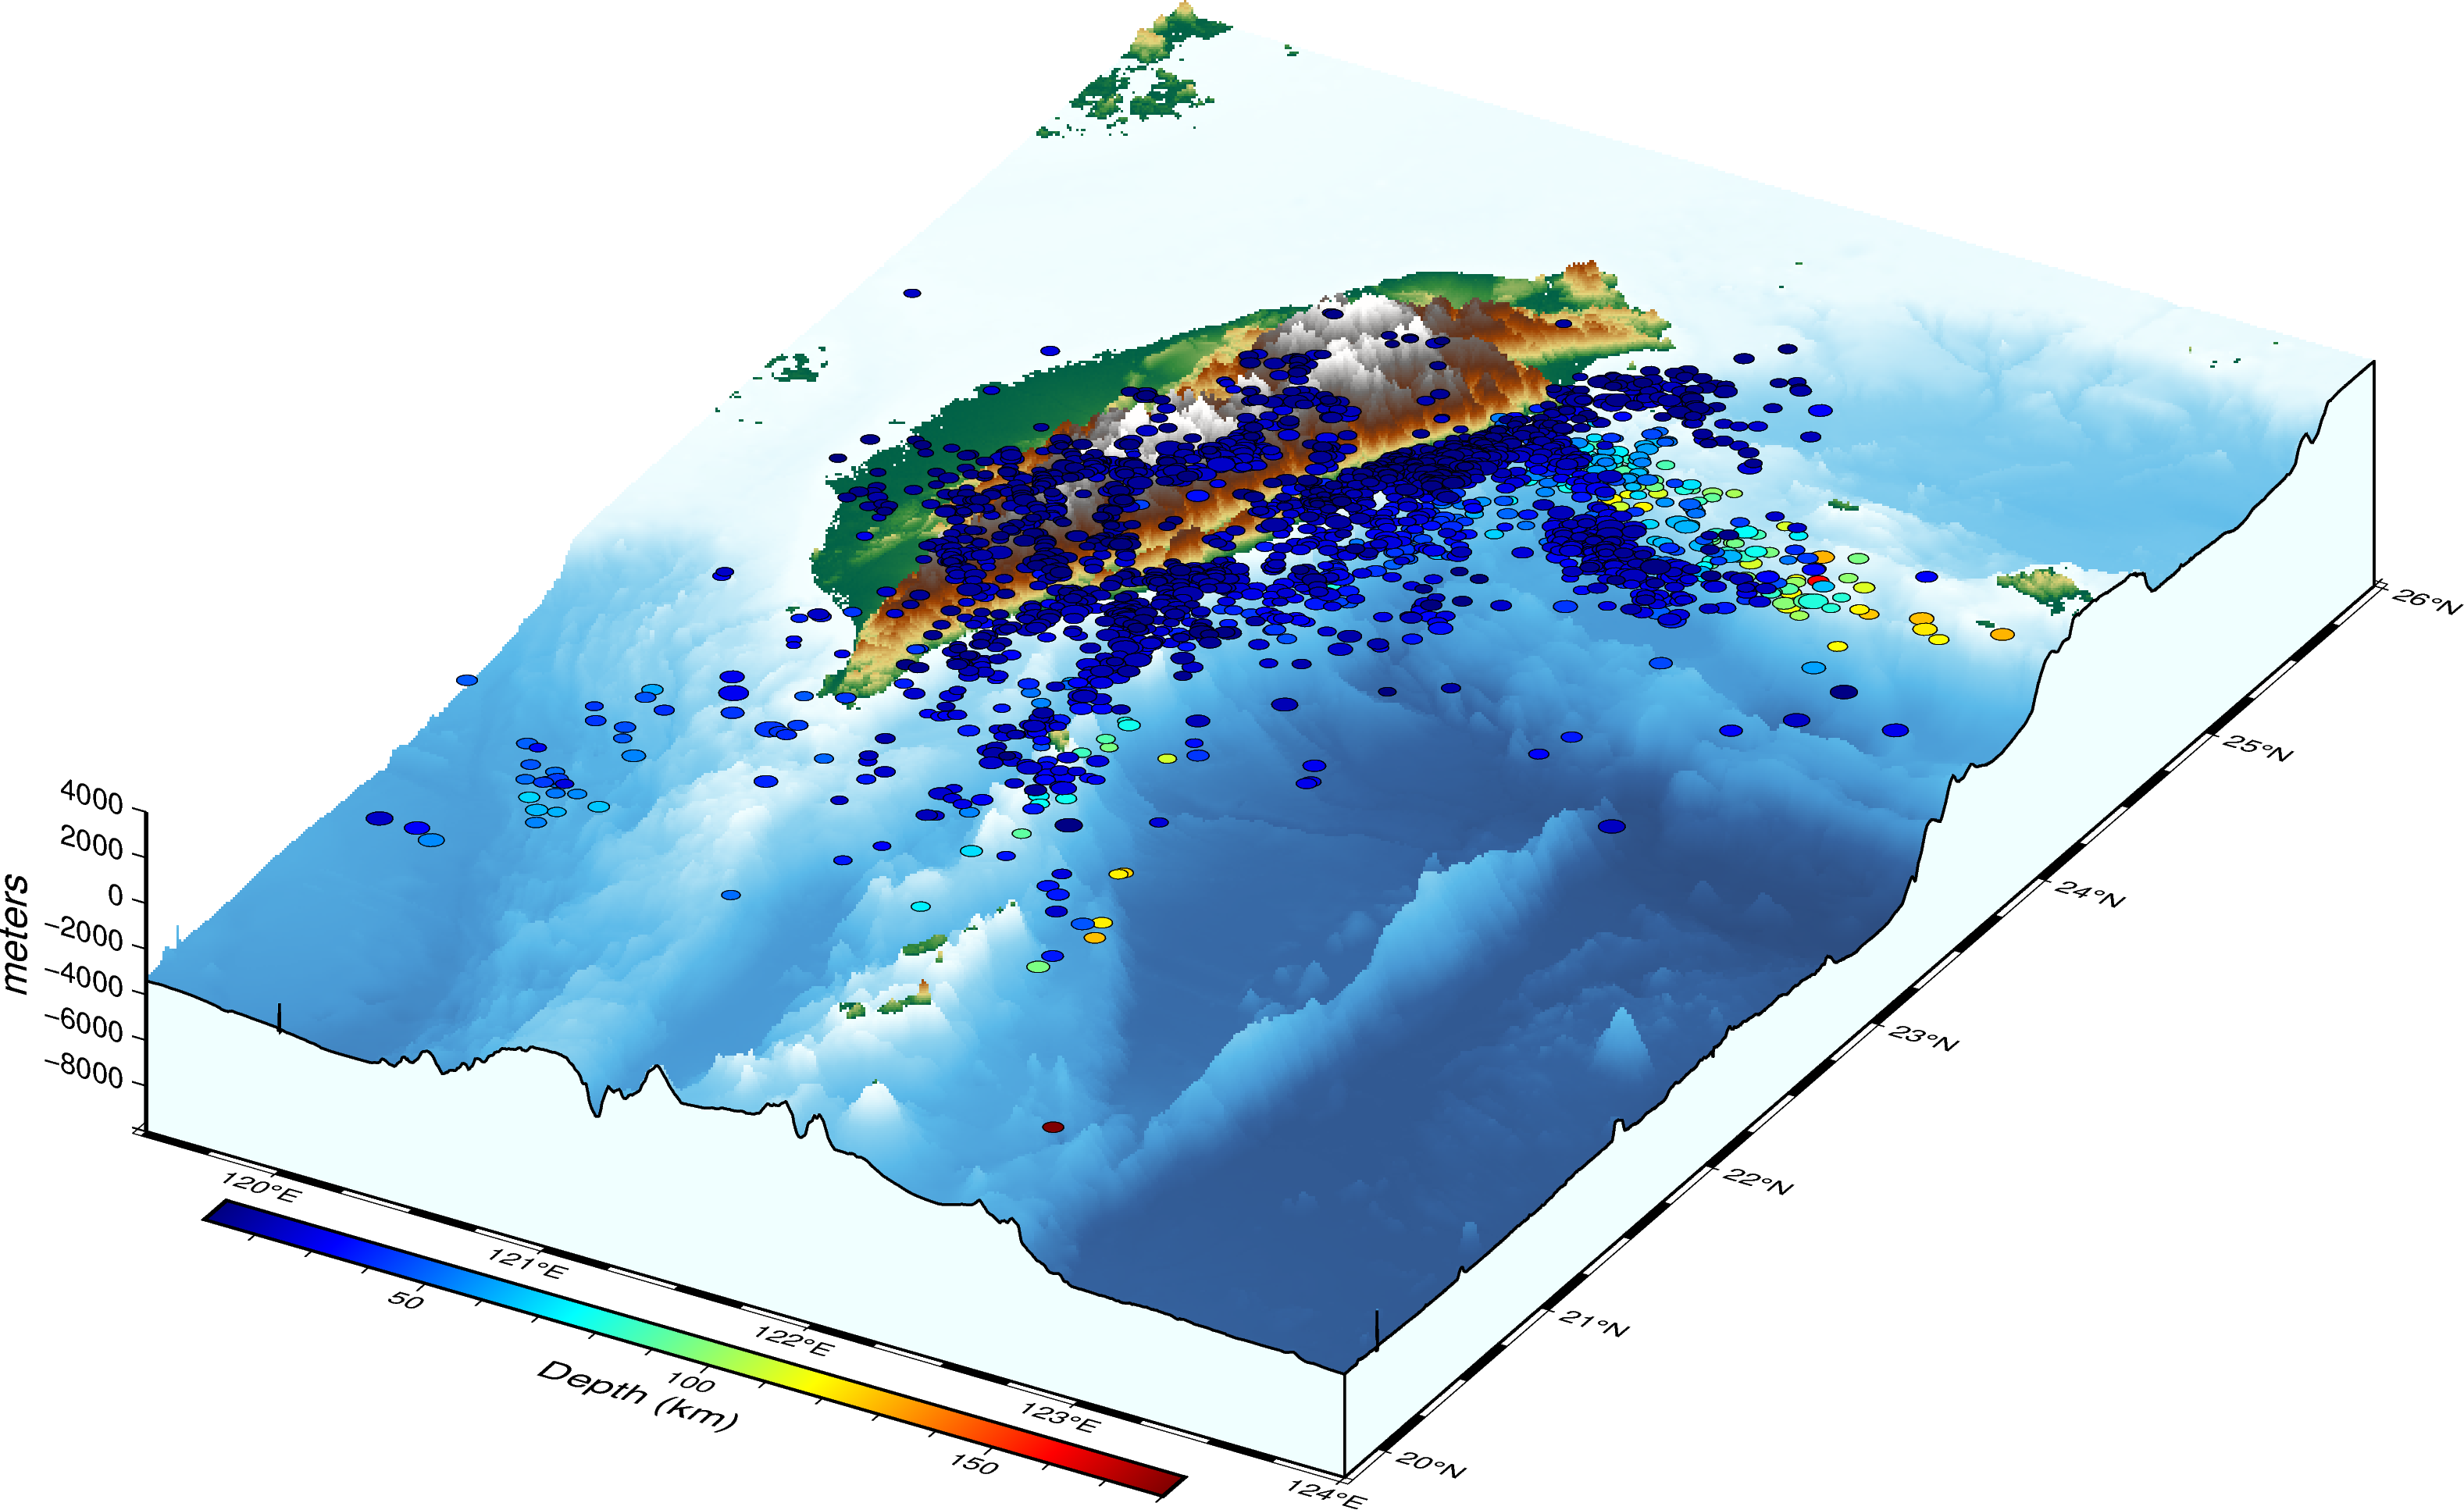 Three dimensional map of Taiwan with overlayed earthquake data